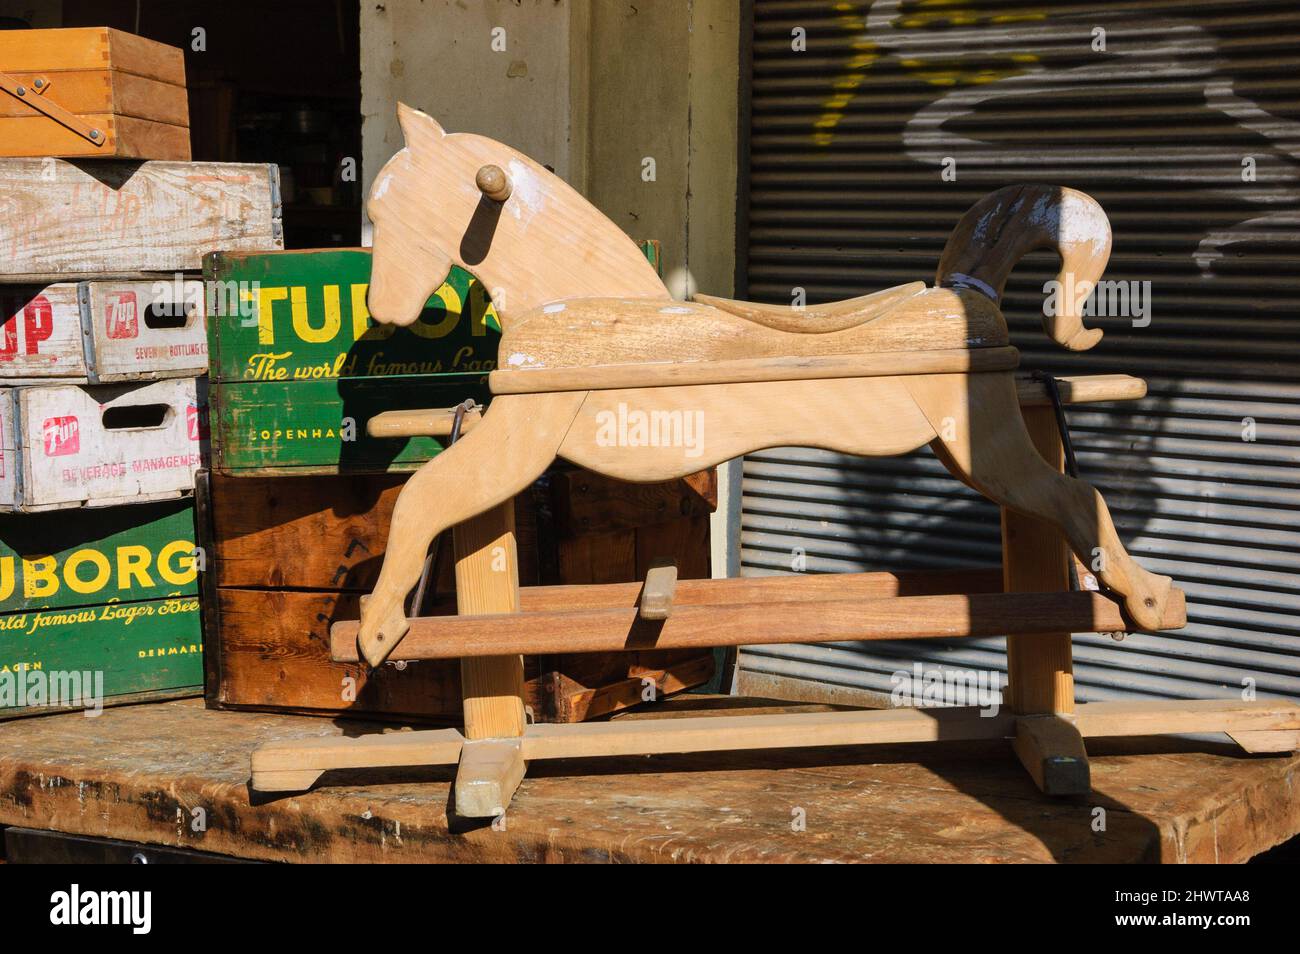 TEL AVIV-YAFO, ISRAEL - FEBRUARY 18, 2014: Wooden rocking horse and old Tuborg beer and 7up boxes for sale at Jaffa flea market Stock Photo